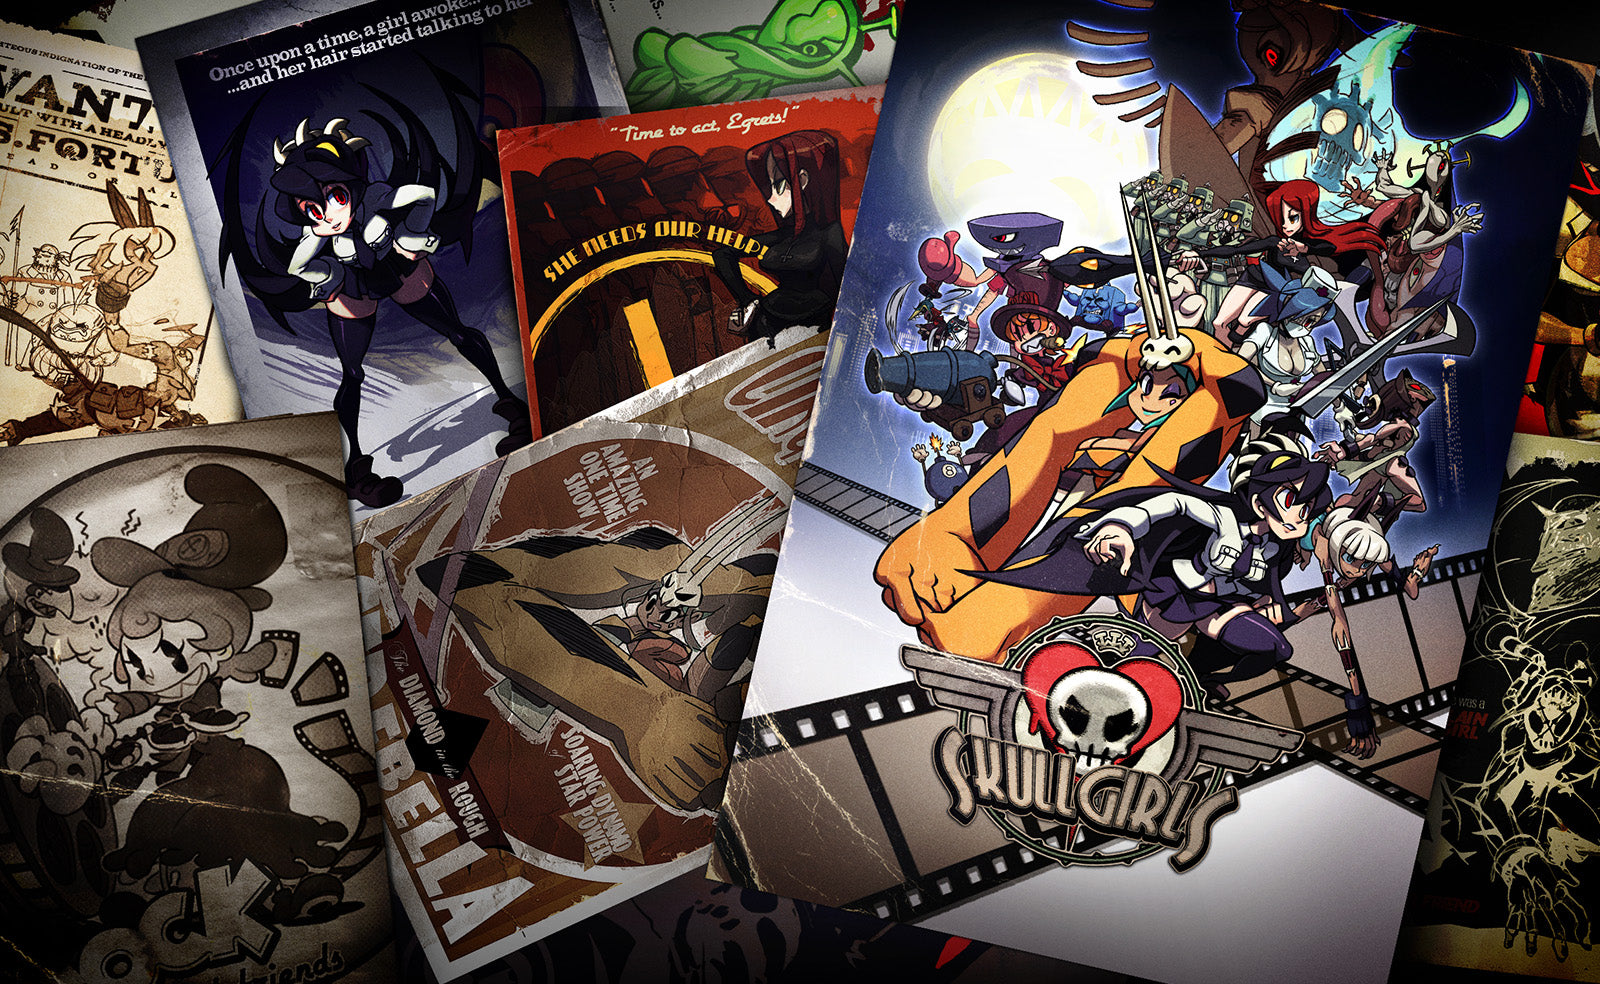 Play Skullgirls (and why you should)